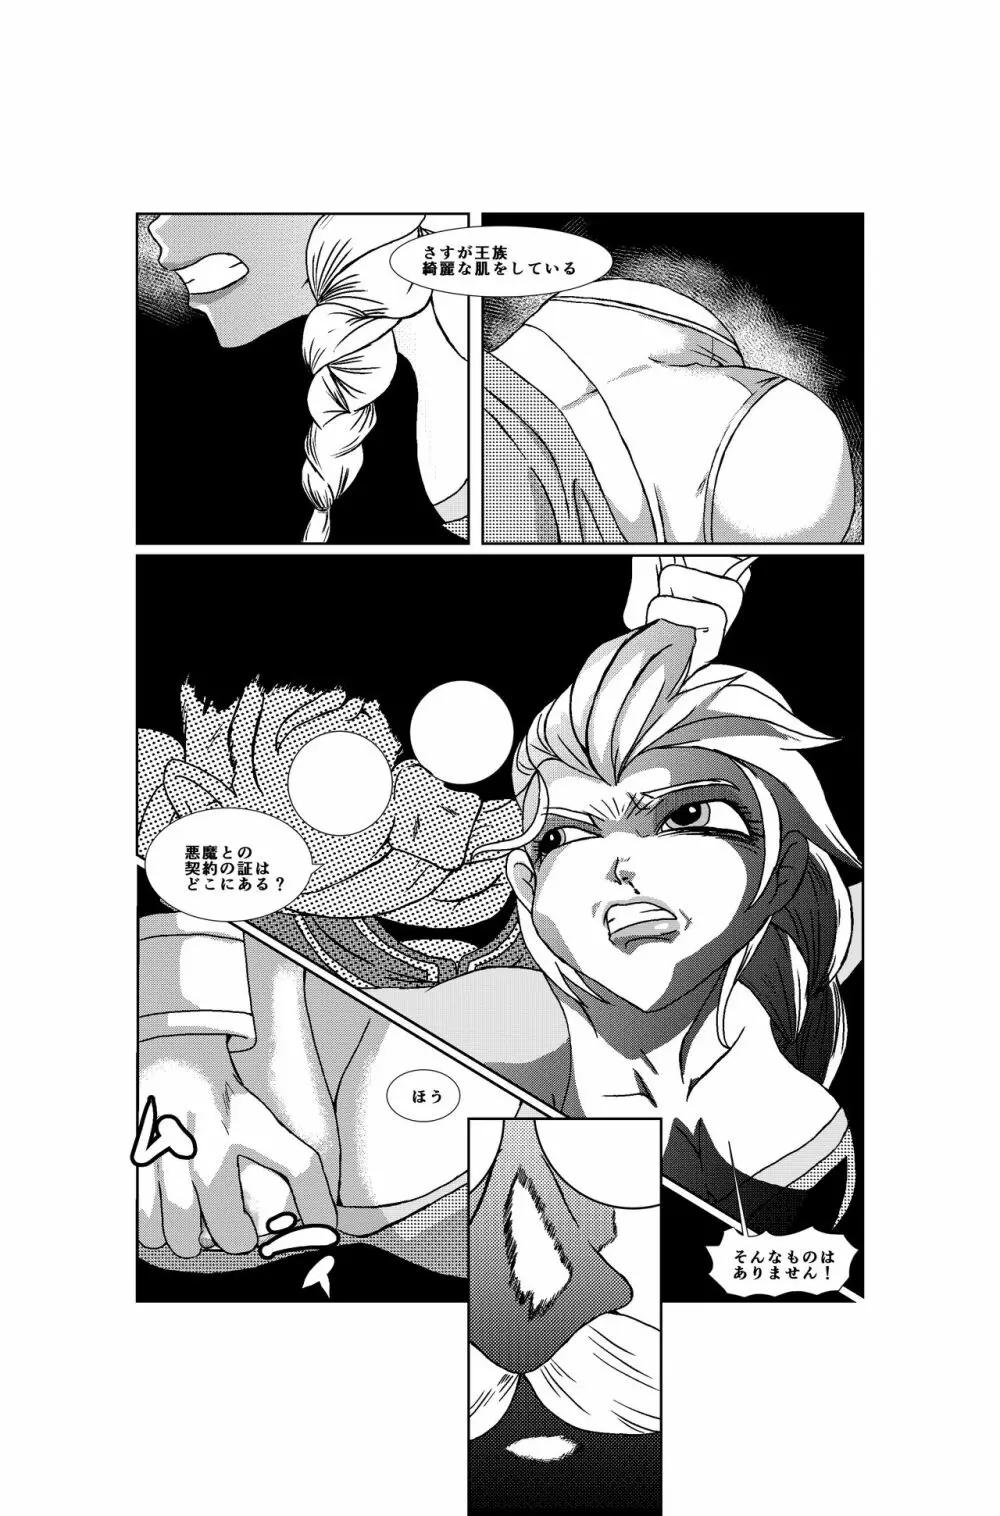 Queen of Snow the beginning - page6